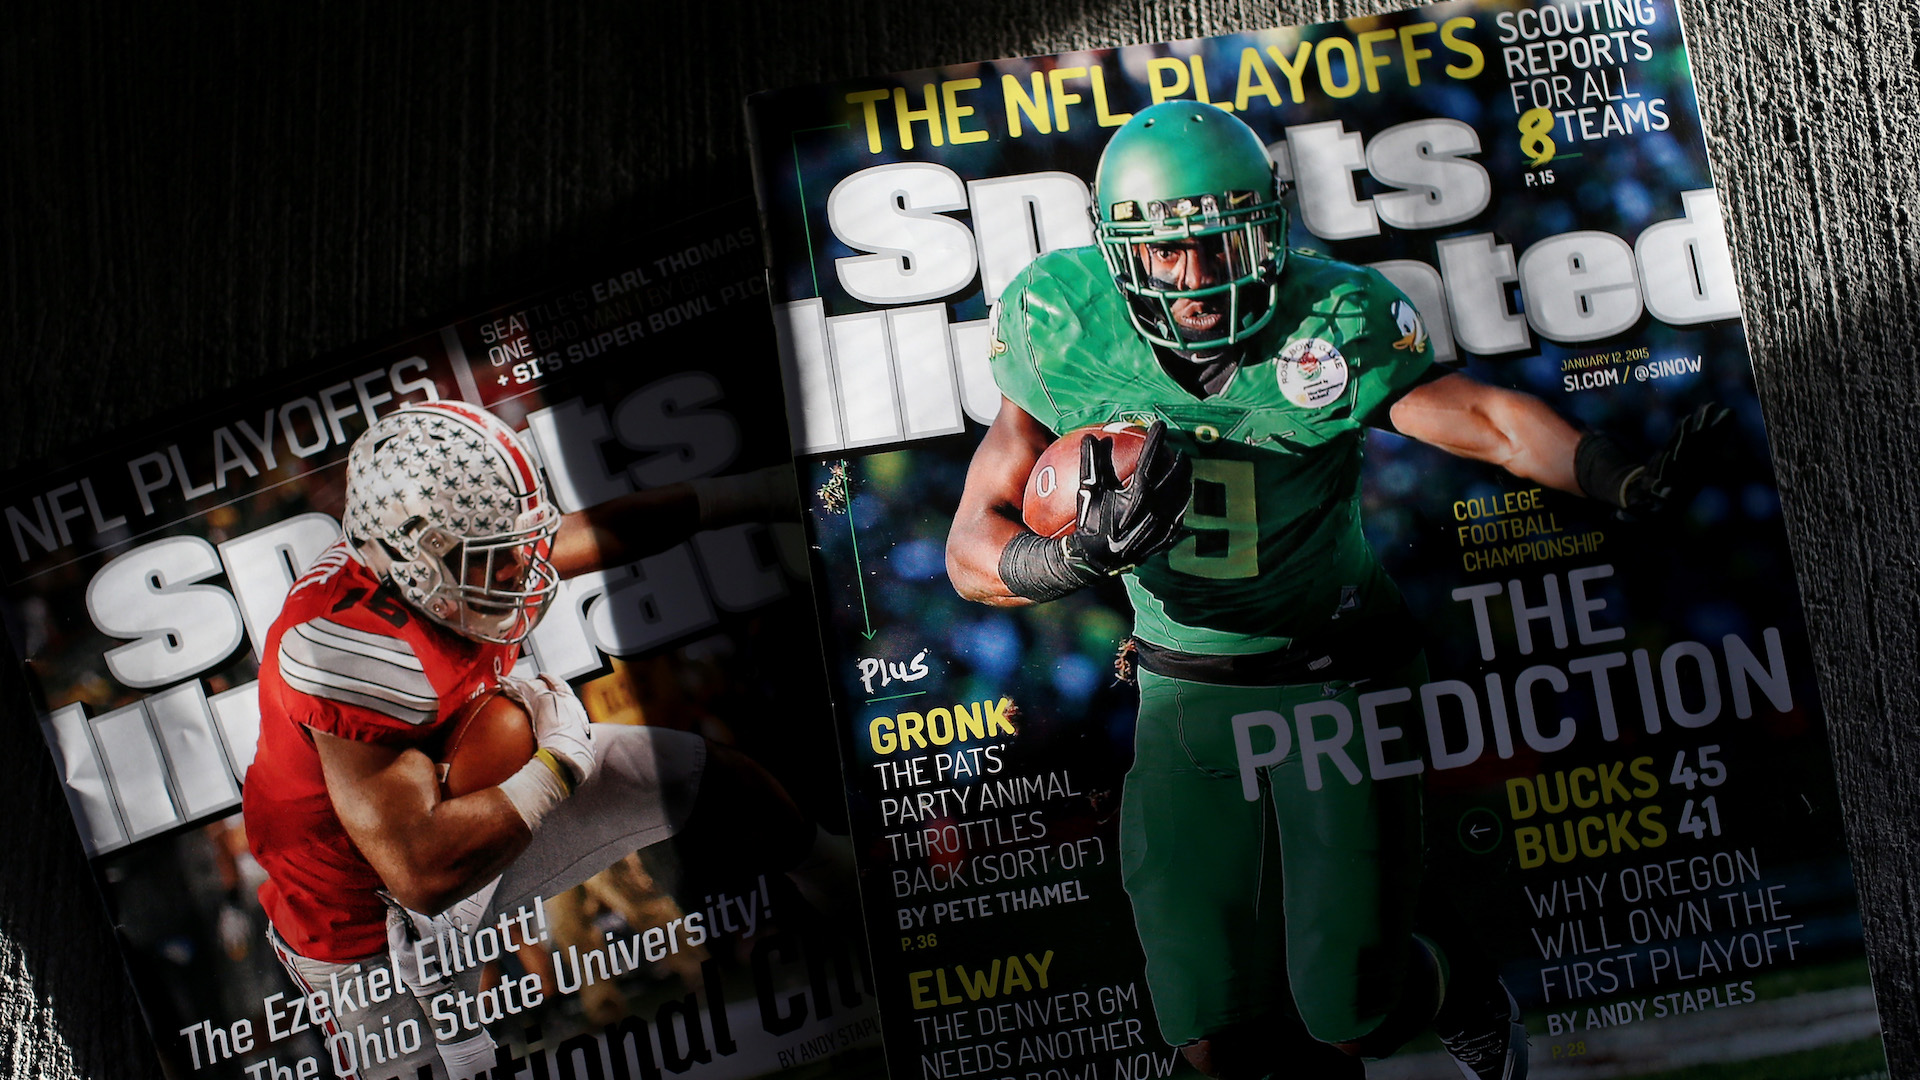 Covers of Sports Illustrated magazines